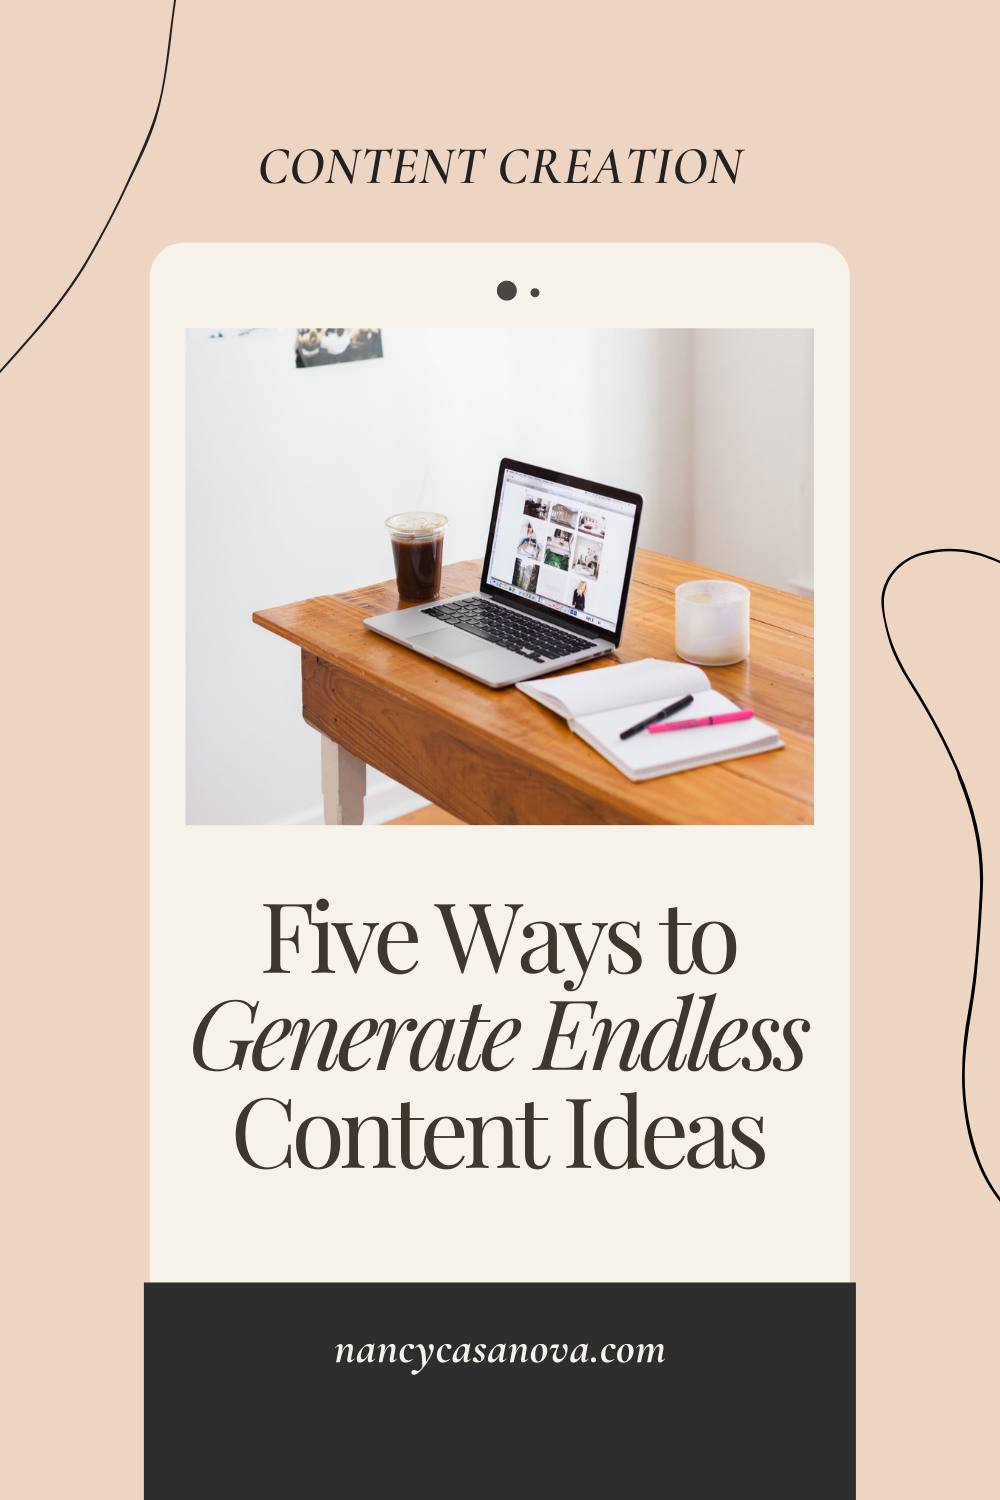 Follow this five step process that can help you generate endless content ideas for social media and your business. content creation tips, content creation tools, content strategy, content marketing, content marketing tips, content strategist